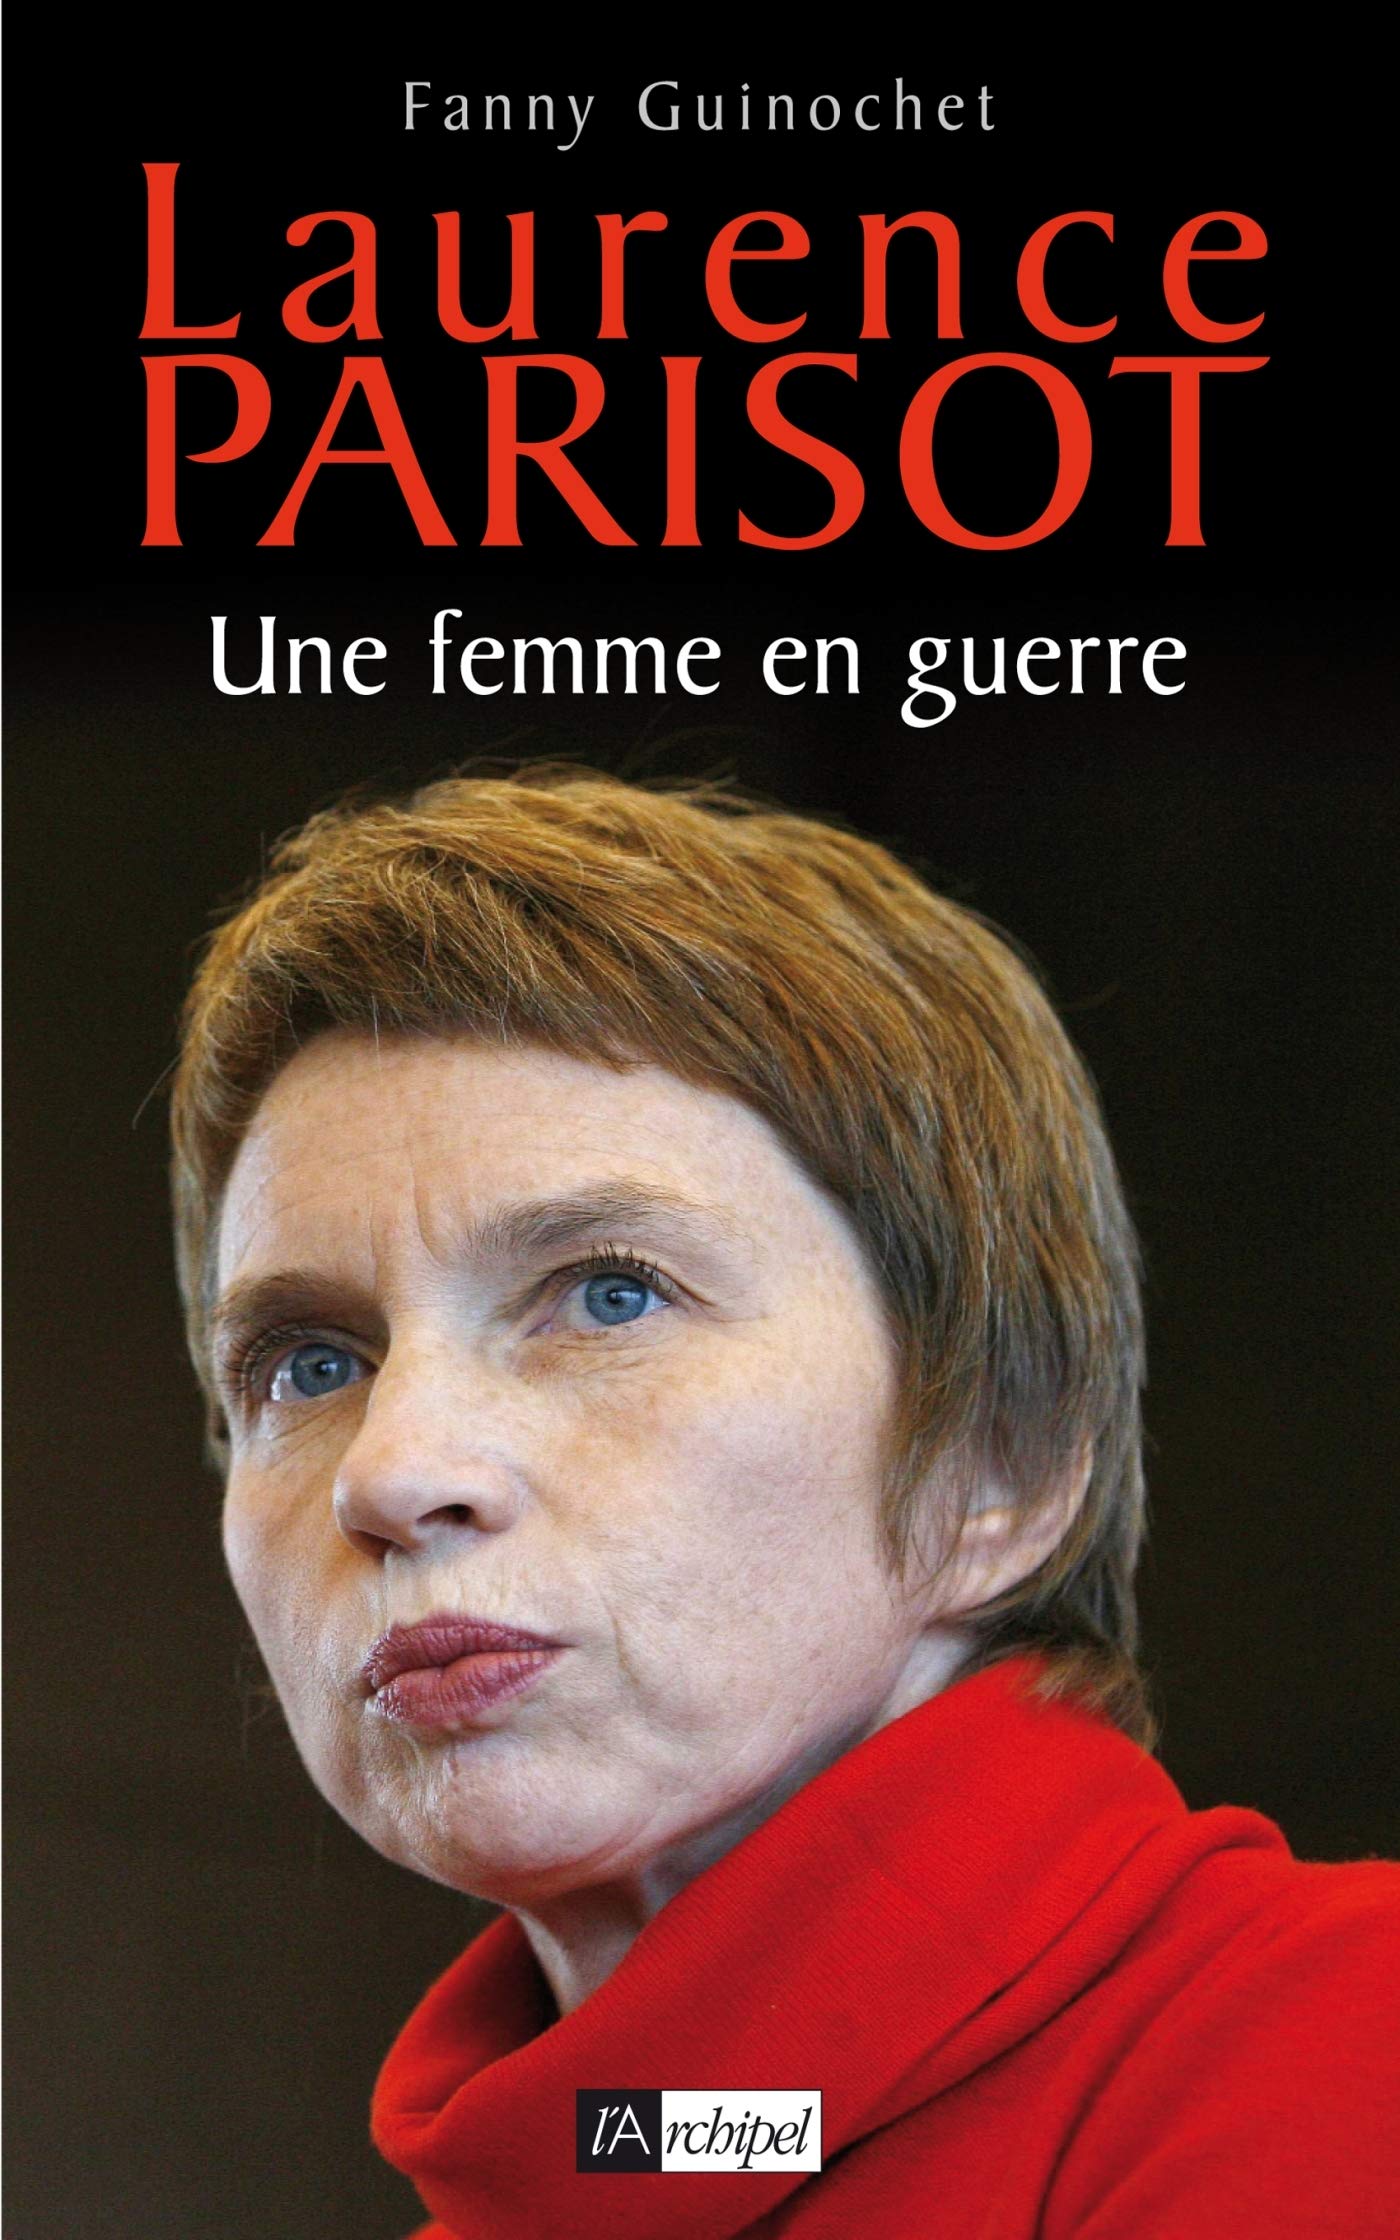 The cover of Laurence Parisot a woman at war